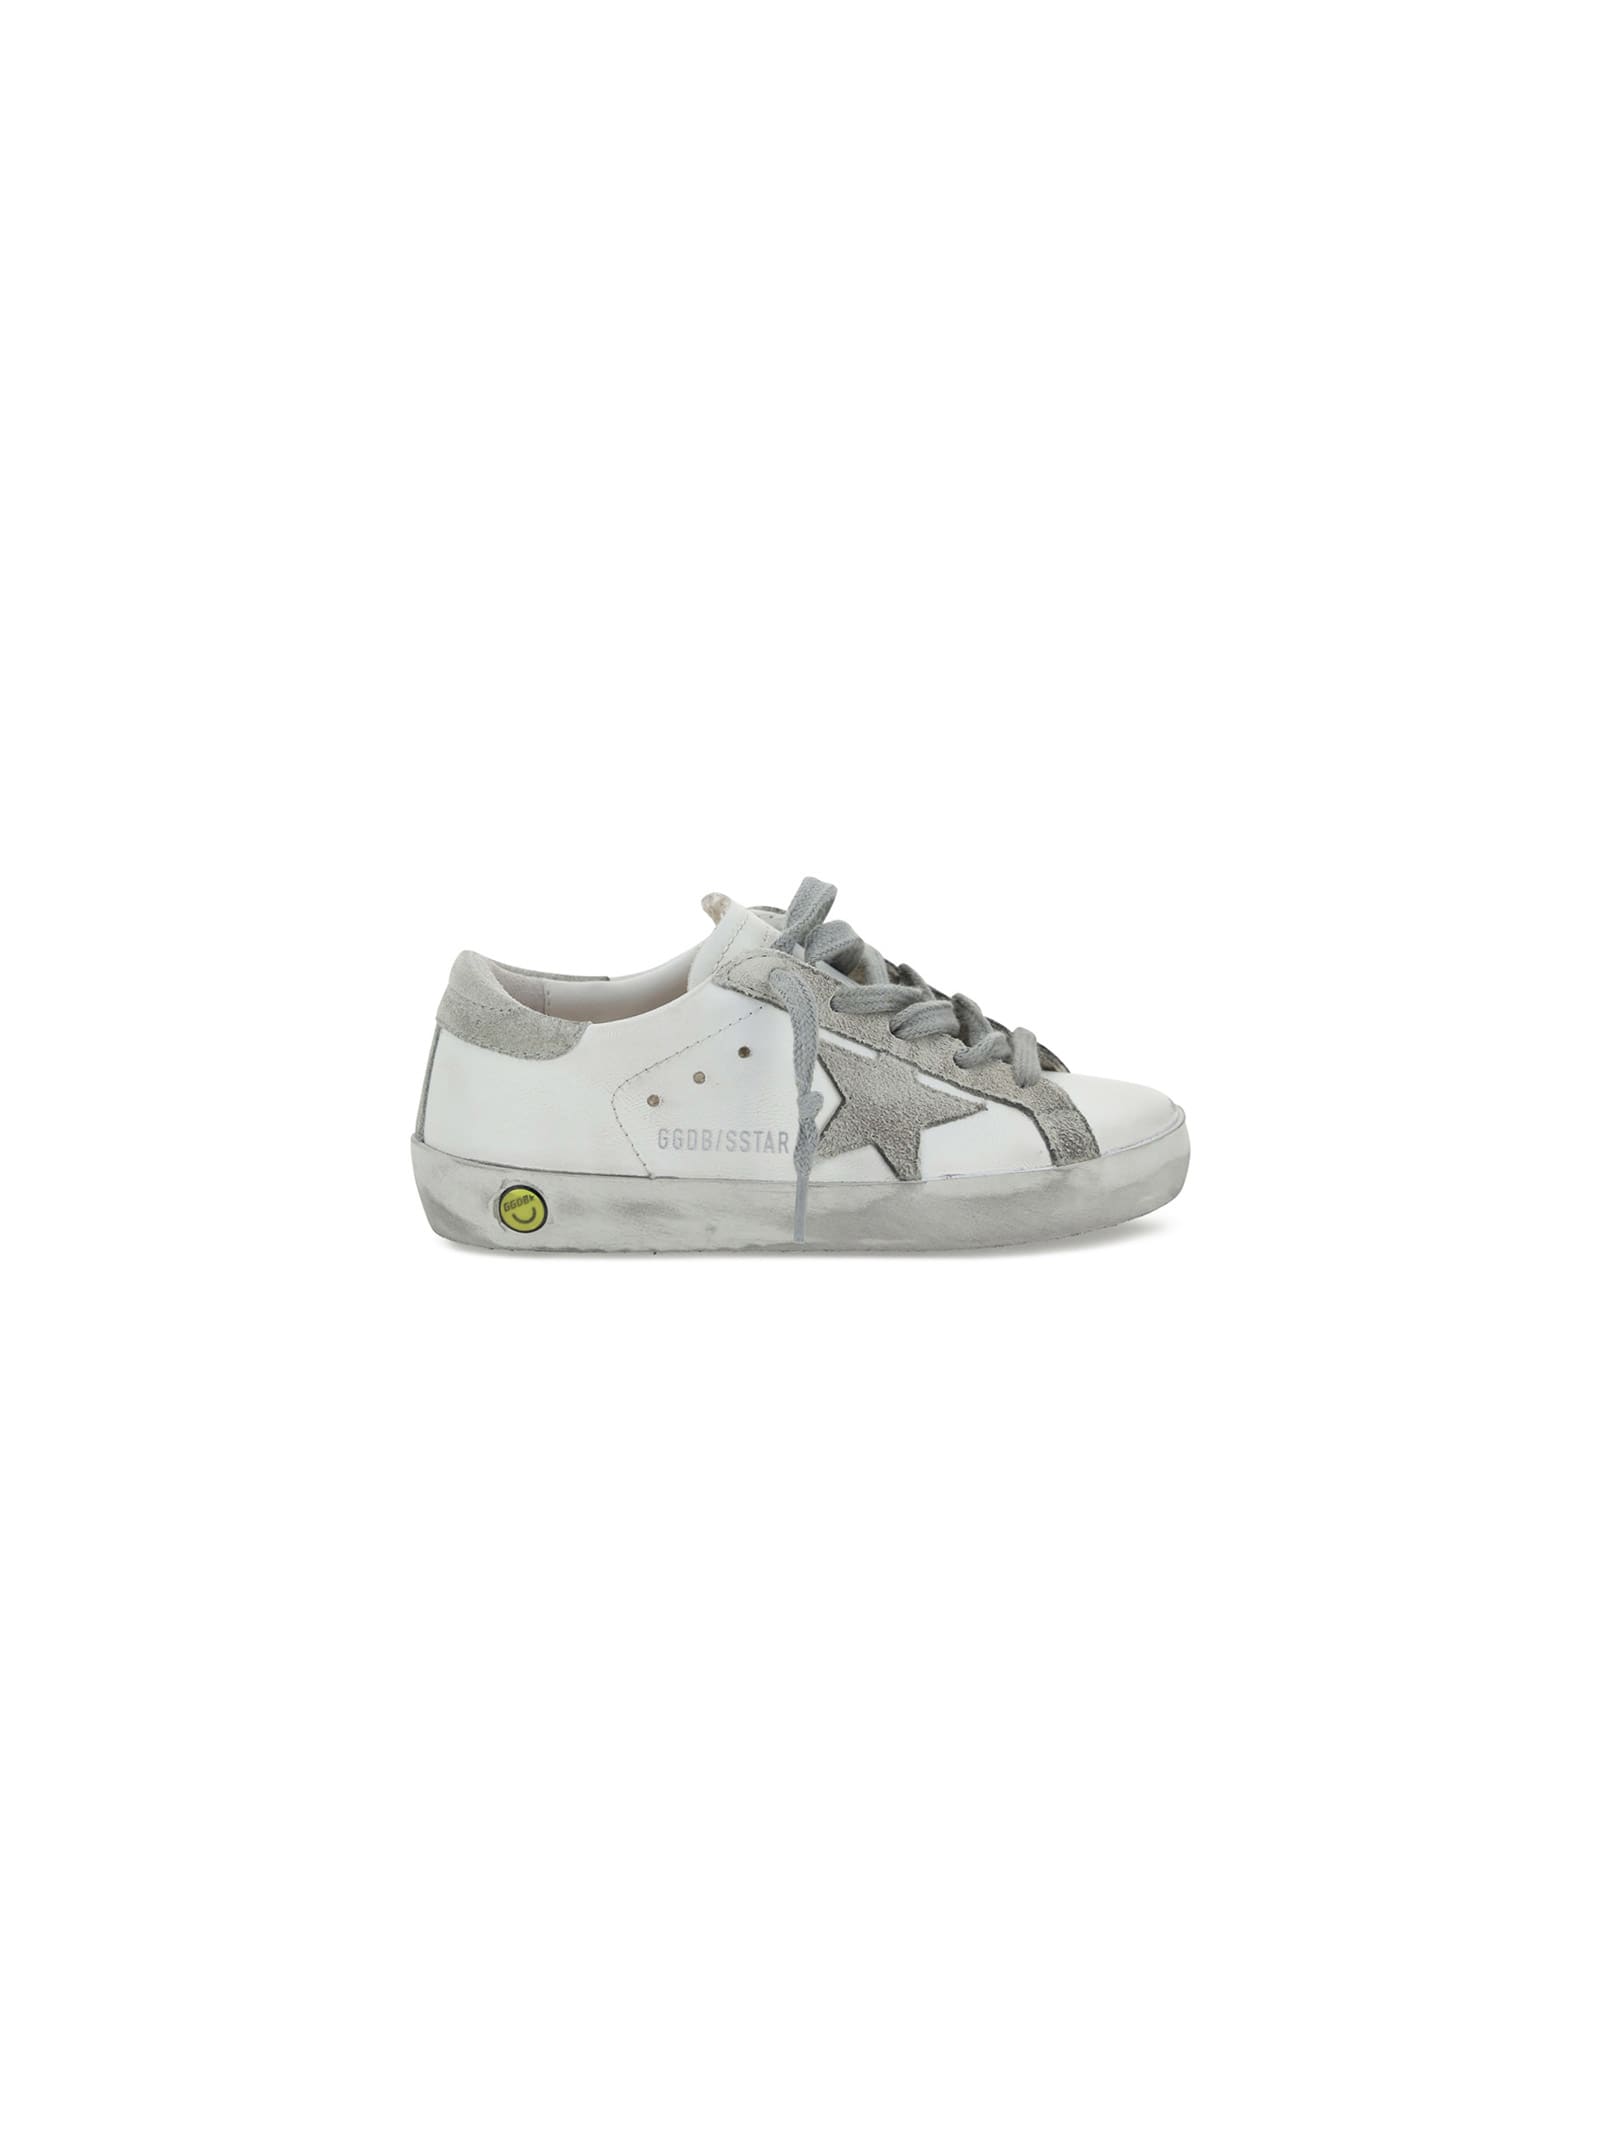 Buy Golden Goose Super Star Sneakers For Girl online, shop Golden Goose shoes with free shipping